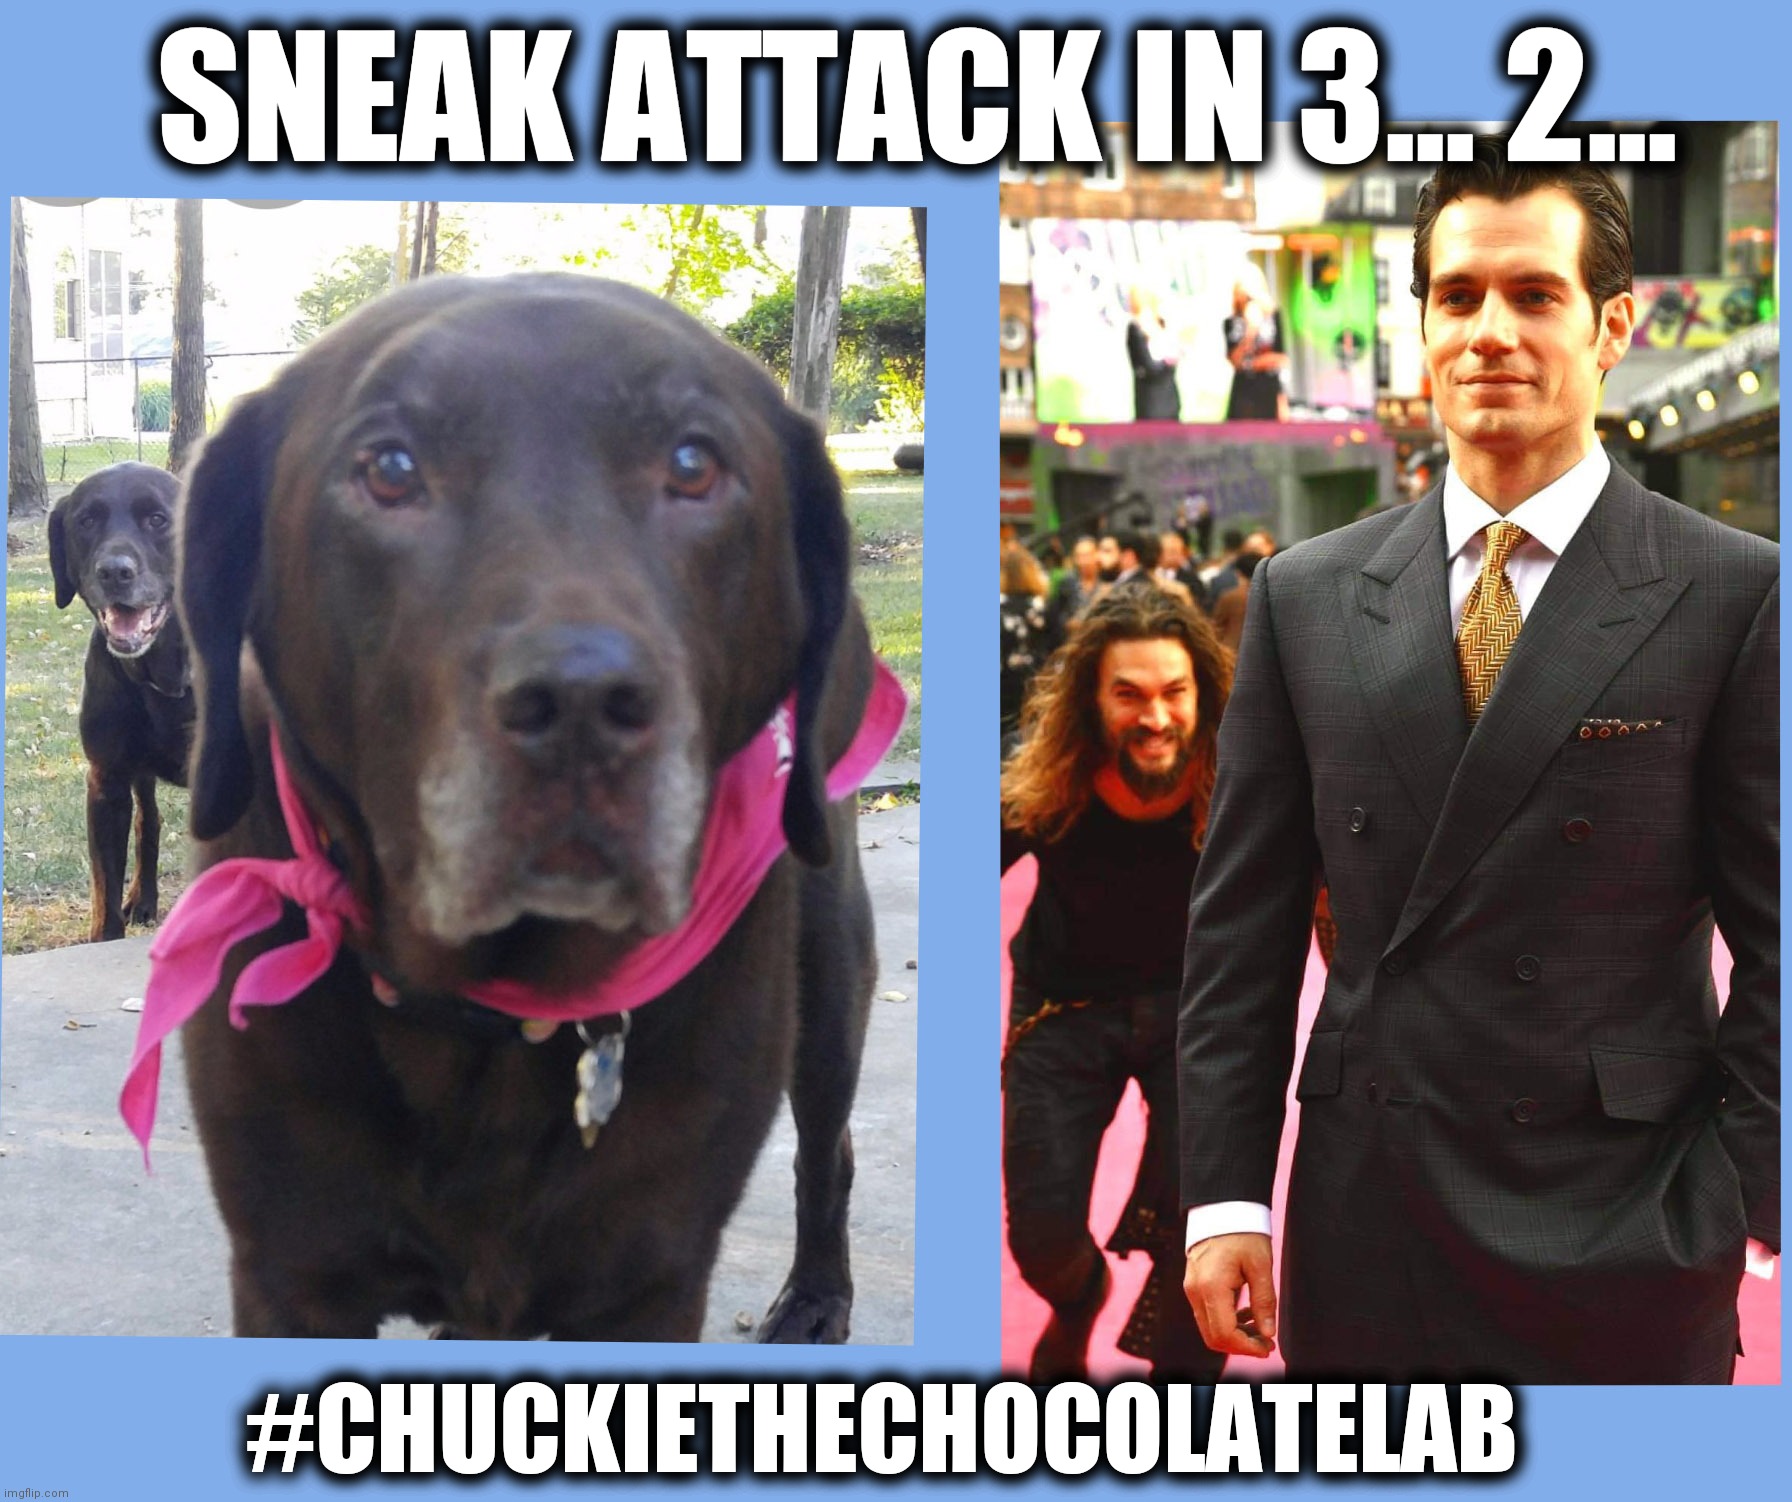 Sneak attack | SNEAK ATTACK IN 3... 2... #CHUCKIETHECHOCOLATELAB | image tagged in chuckie the chocolate lab,dogs,funny,sneak attack,jason momoa henry cavill meme,memes | made w/ Imgflip meme maker